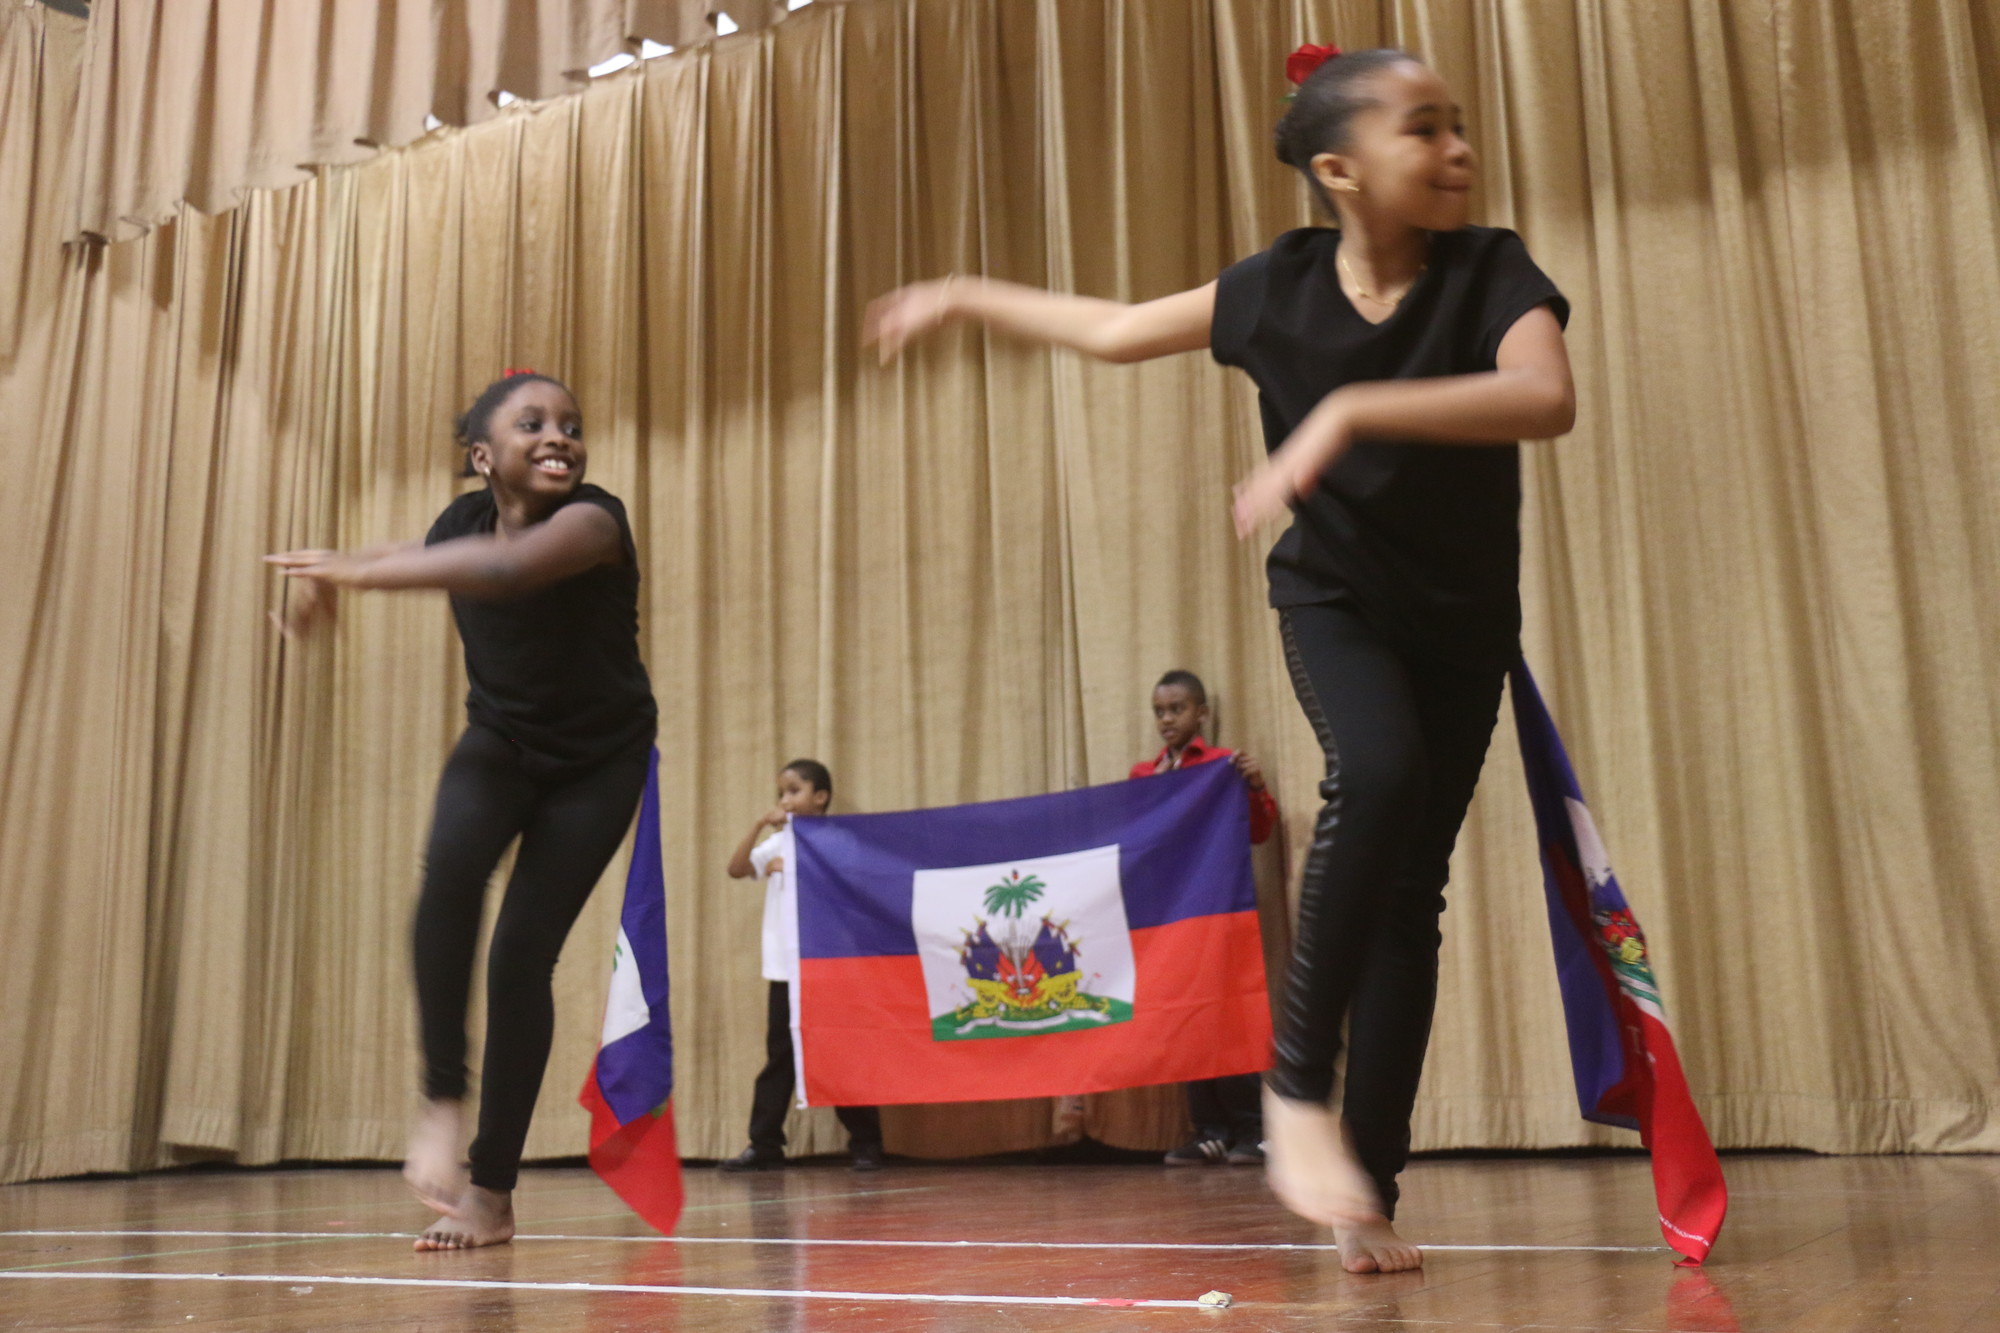 Jolina Badette, left, and Ysabel Clesca danced in front of the Haitian flag.